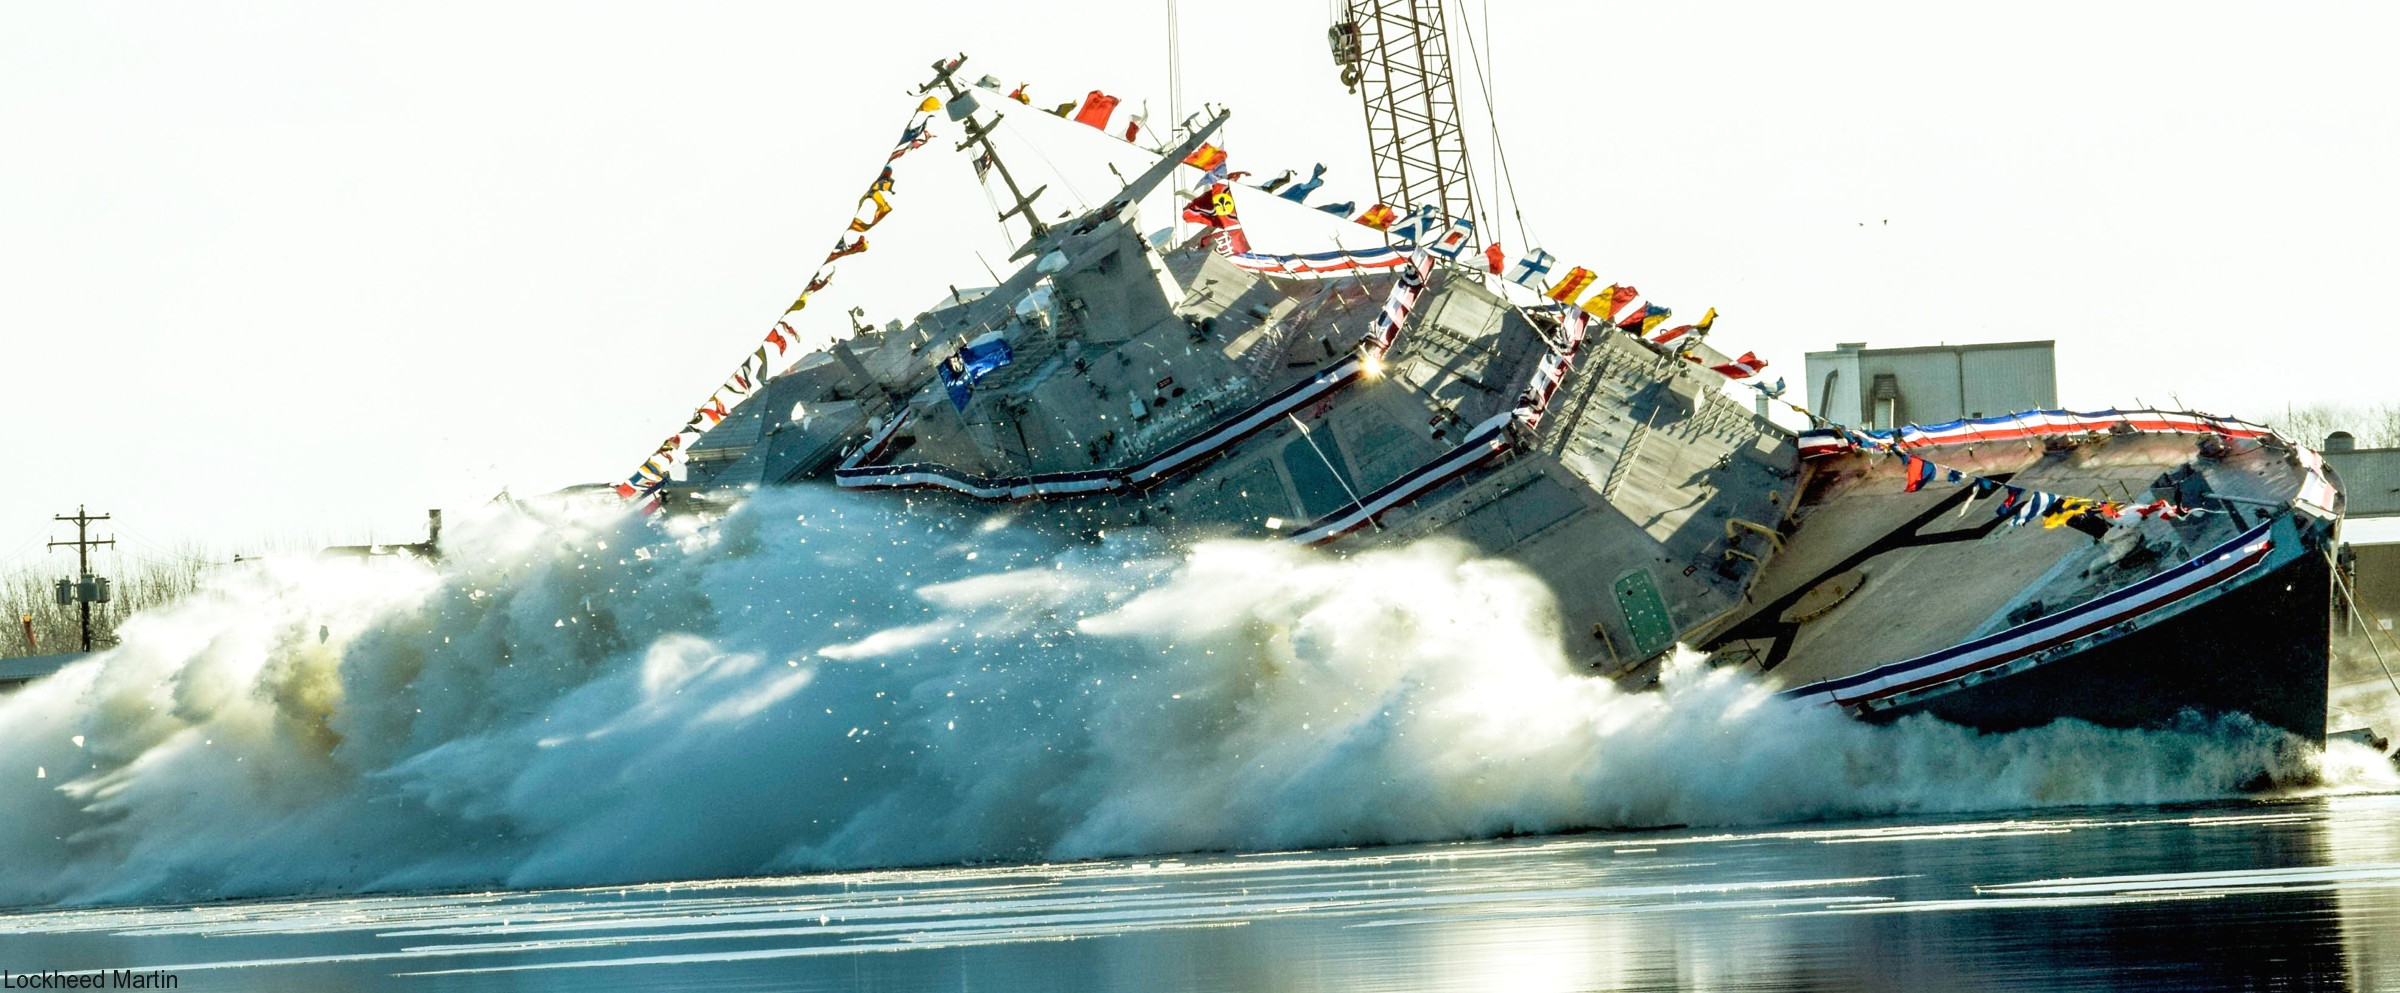 lcs-19 uss st. louis freedom class littoral combat ship us navy 06 launching